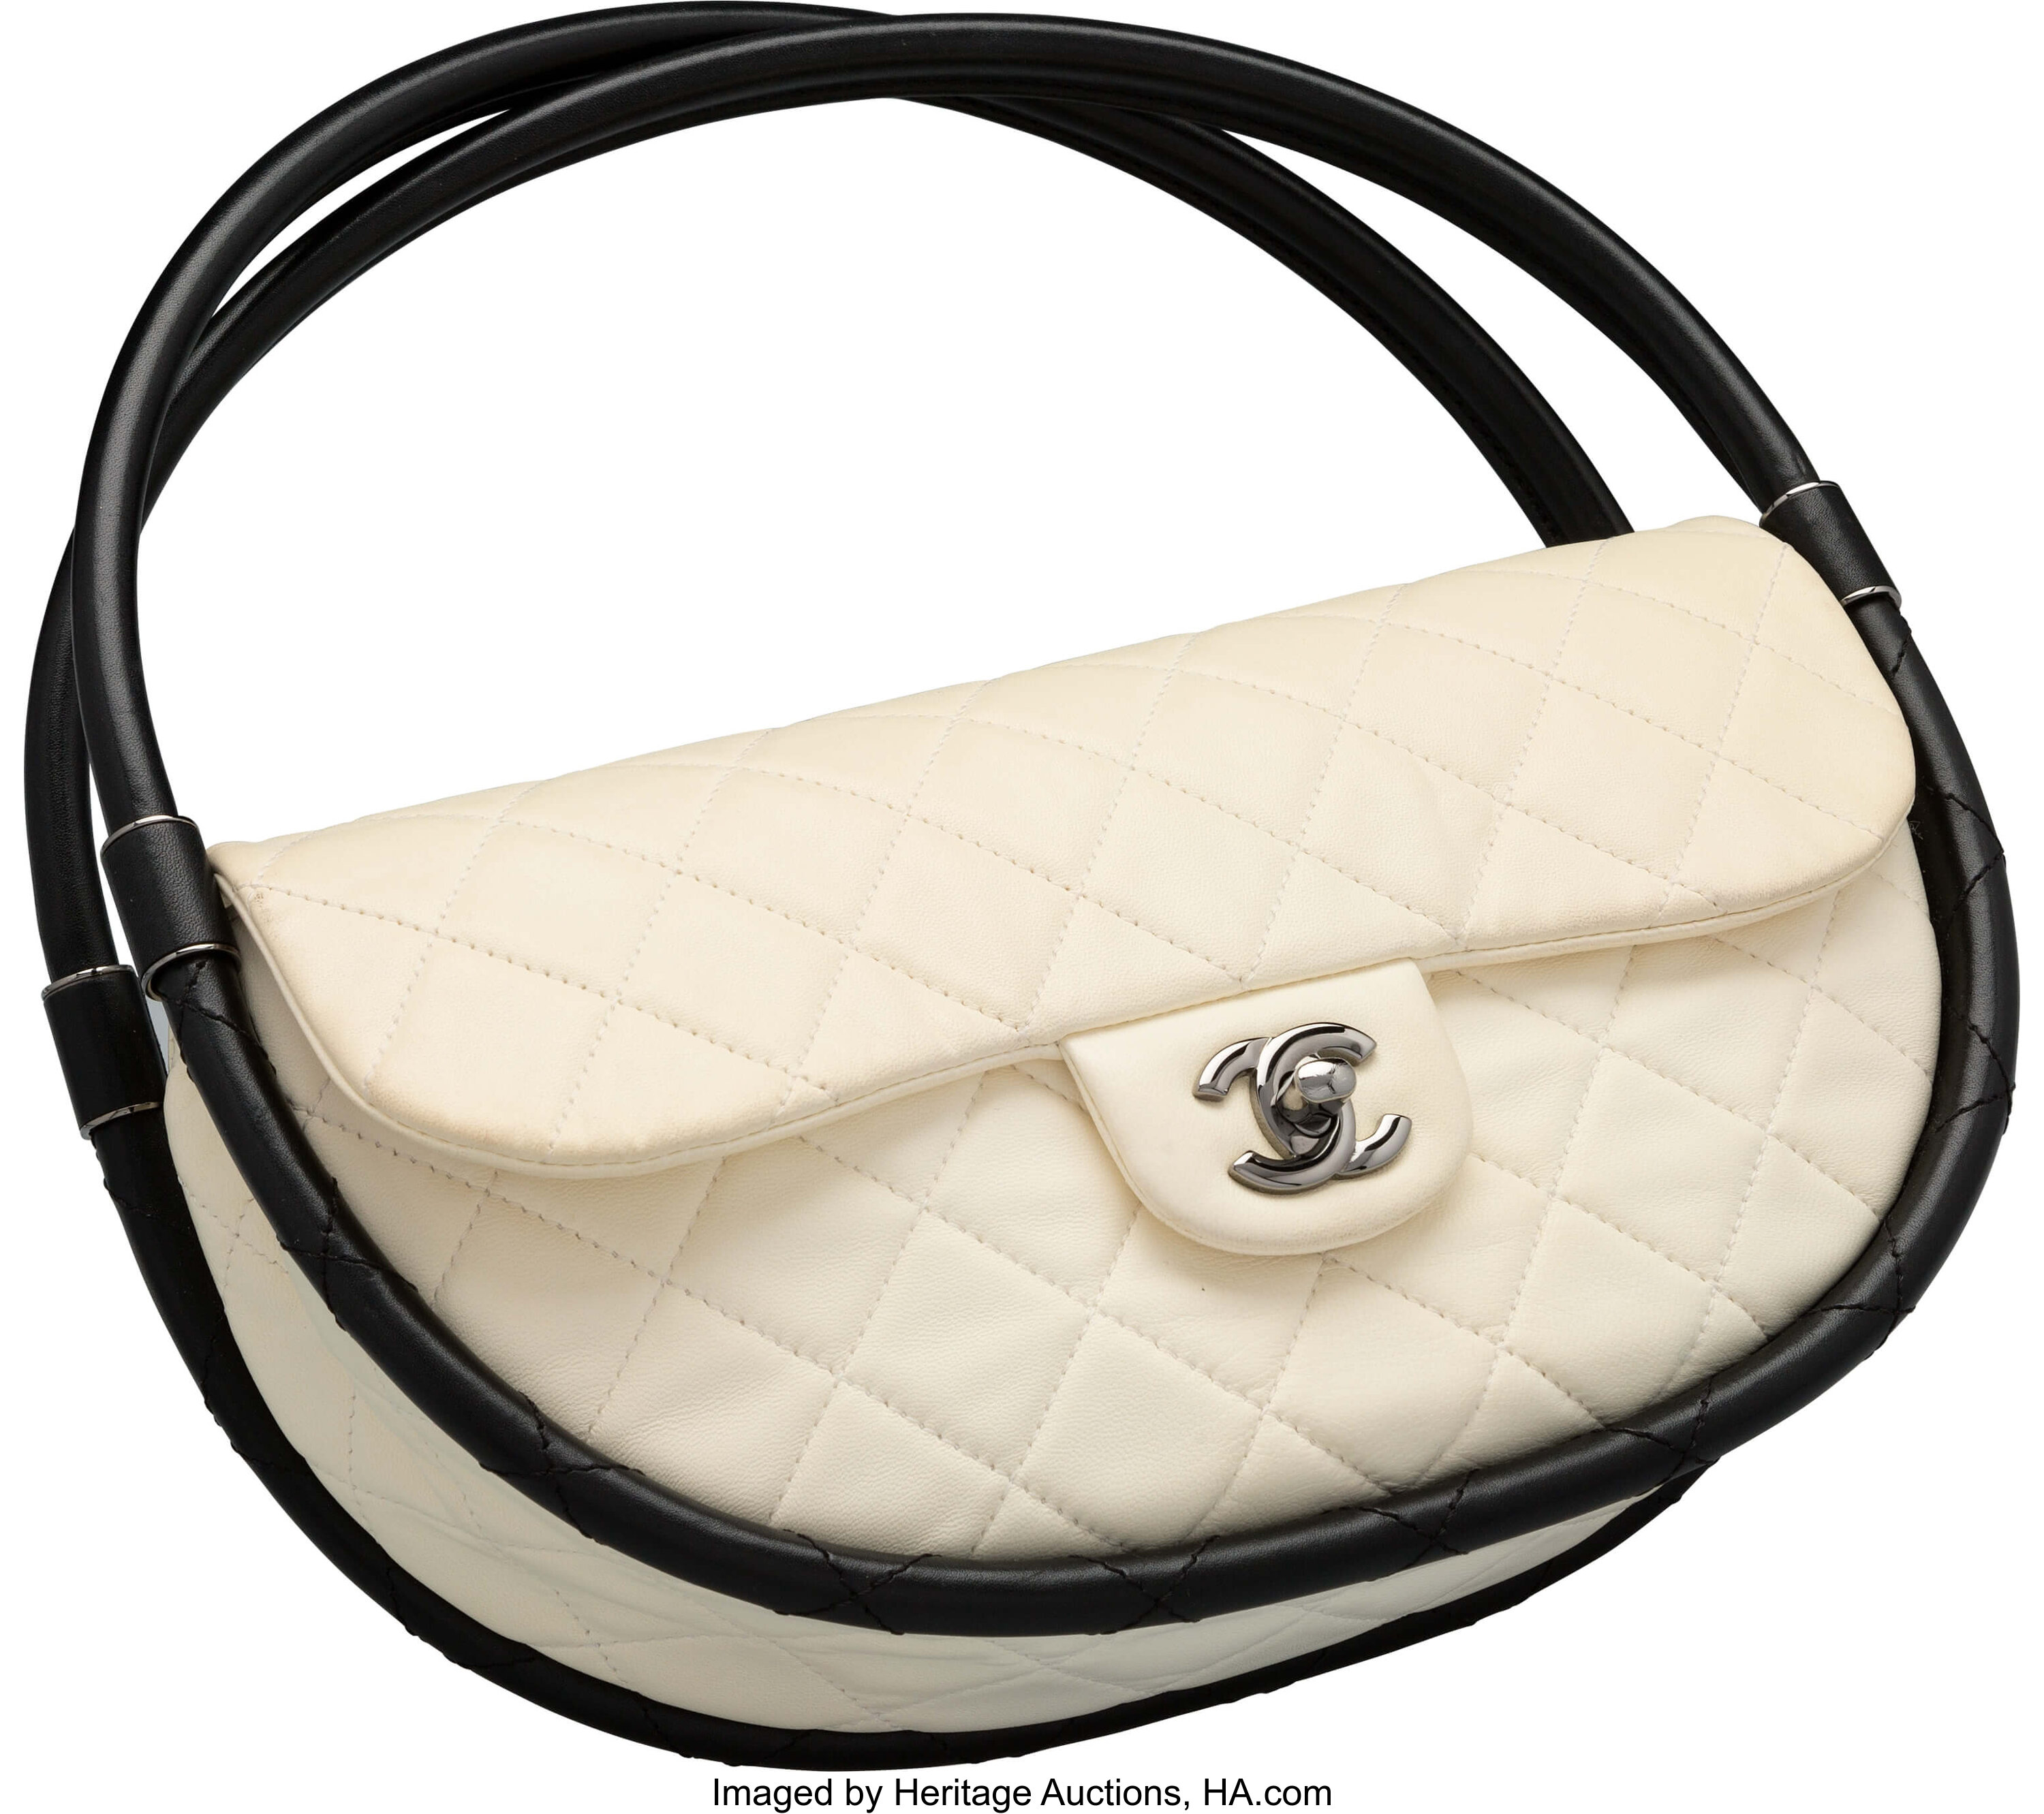 Chanel Hula Hoop Bag Reference Guide - Spotted Fashion